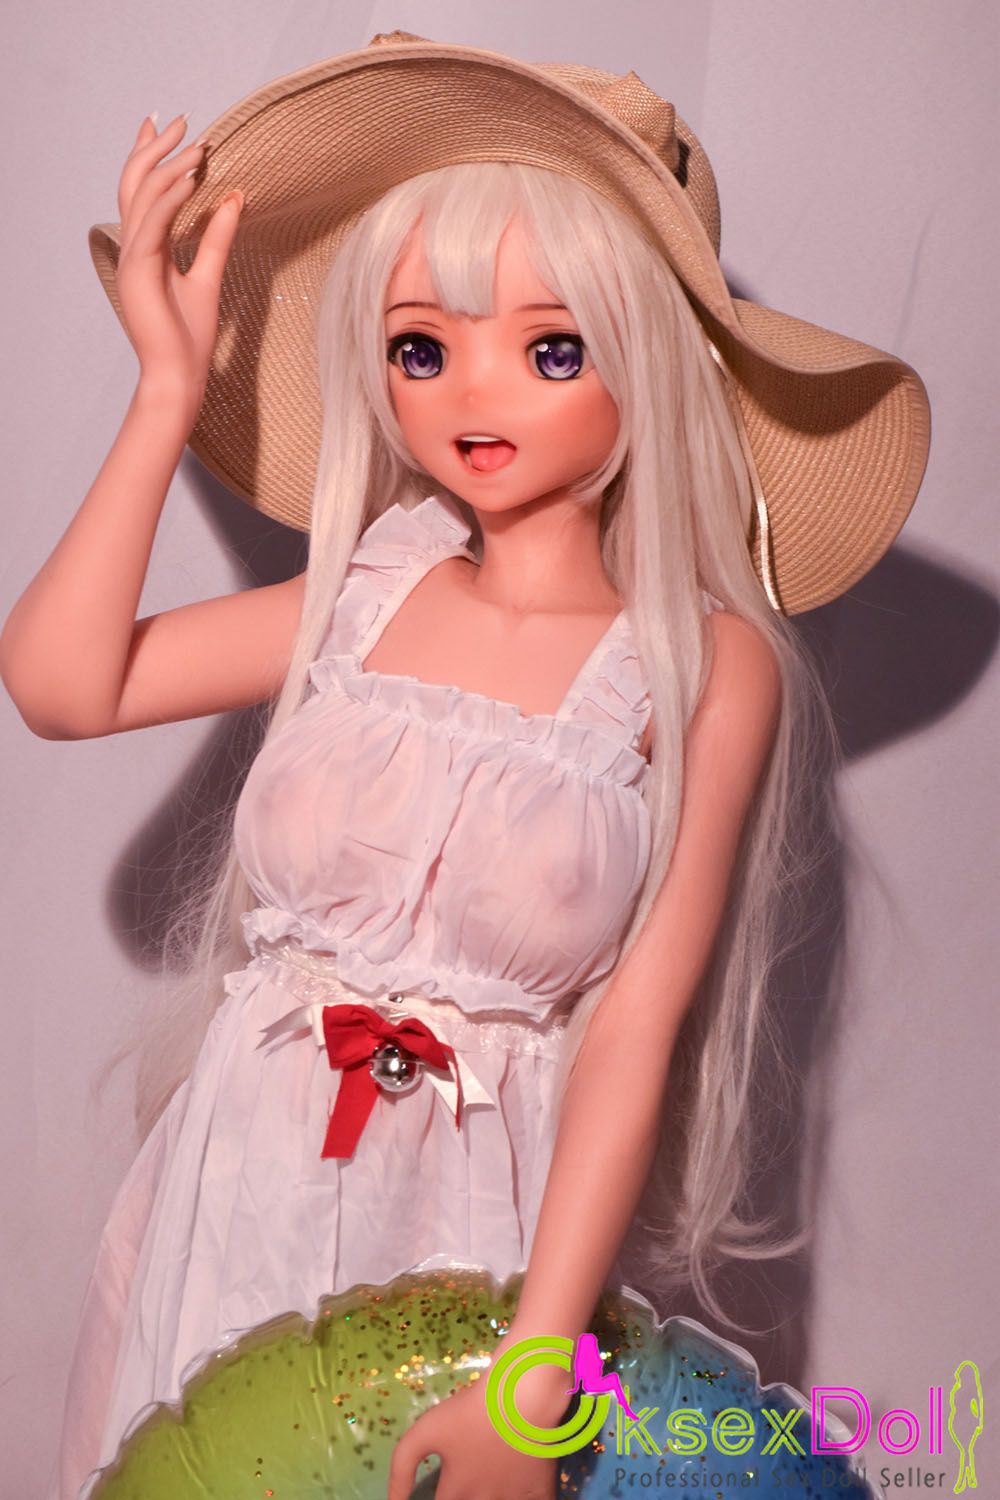 Small Breast Silicone Doll Photos